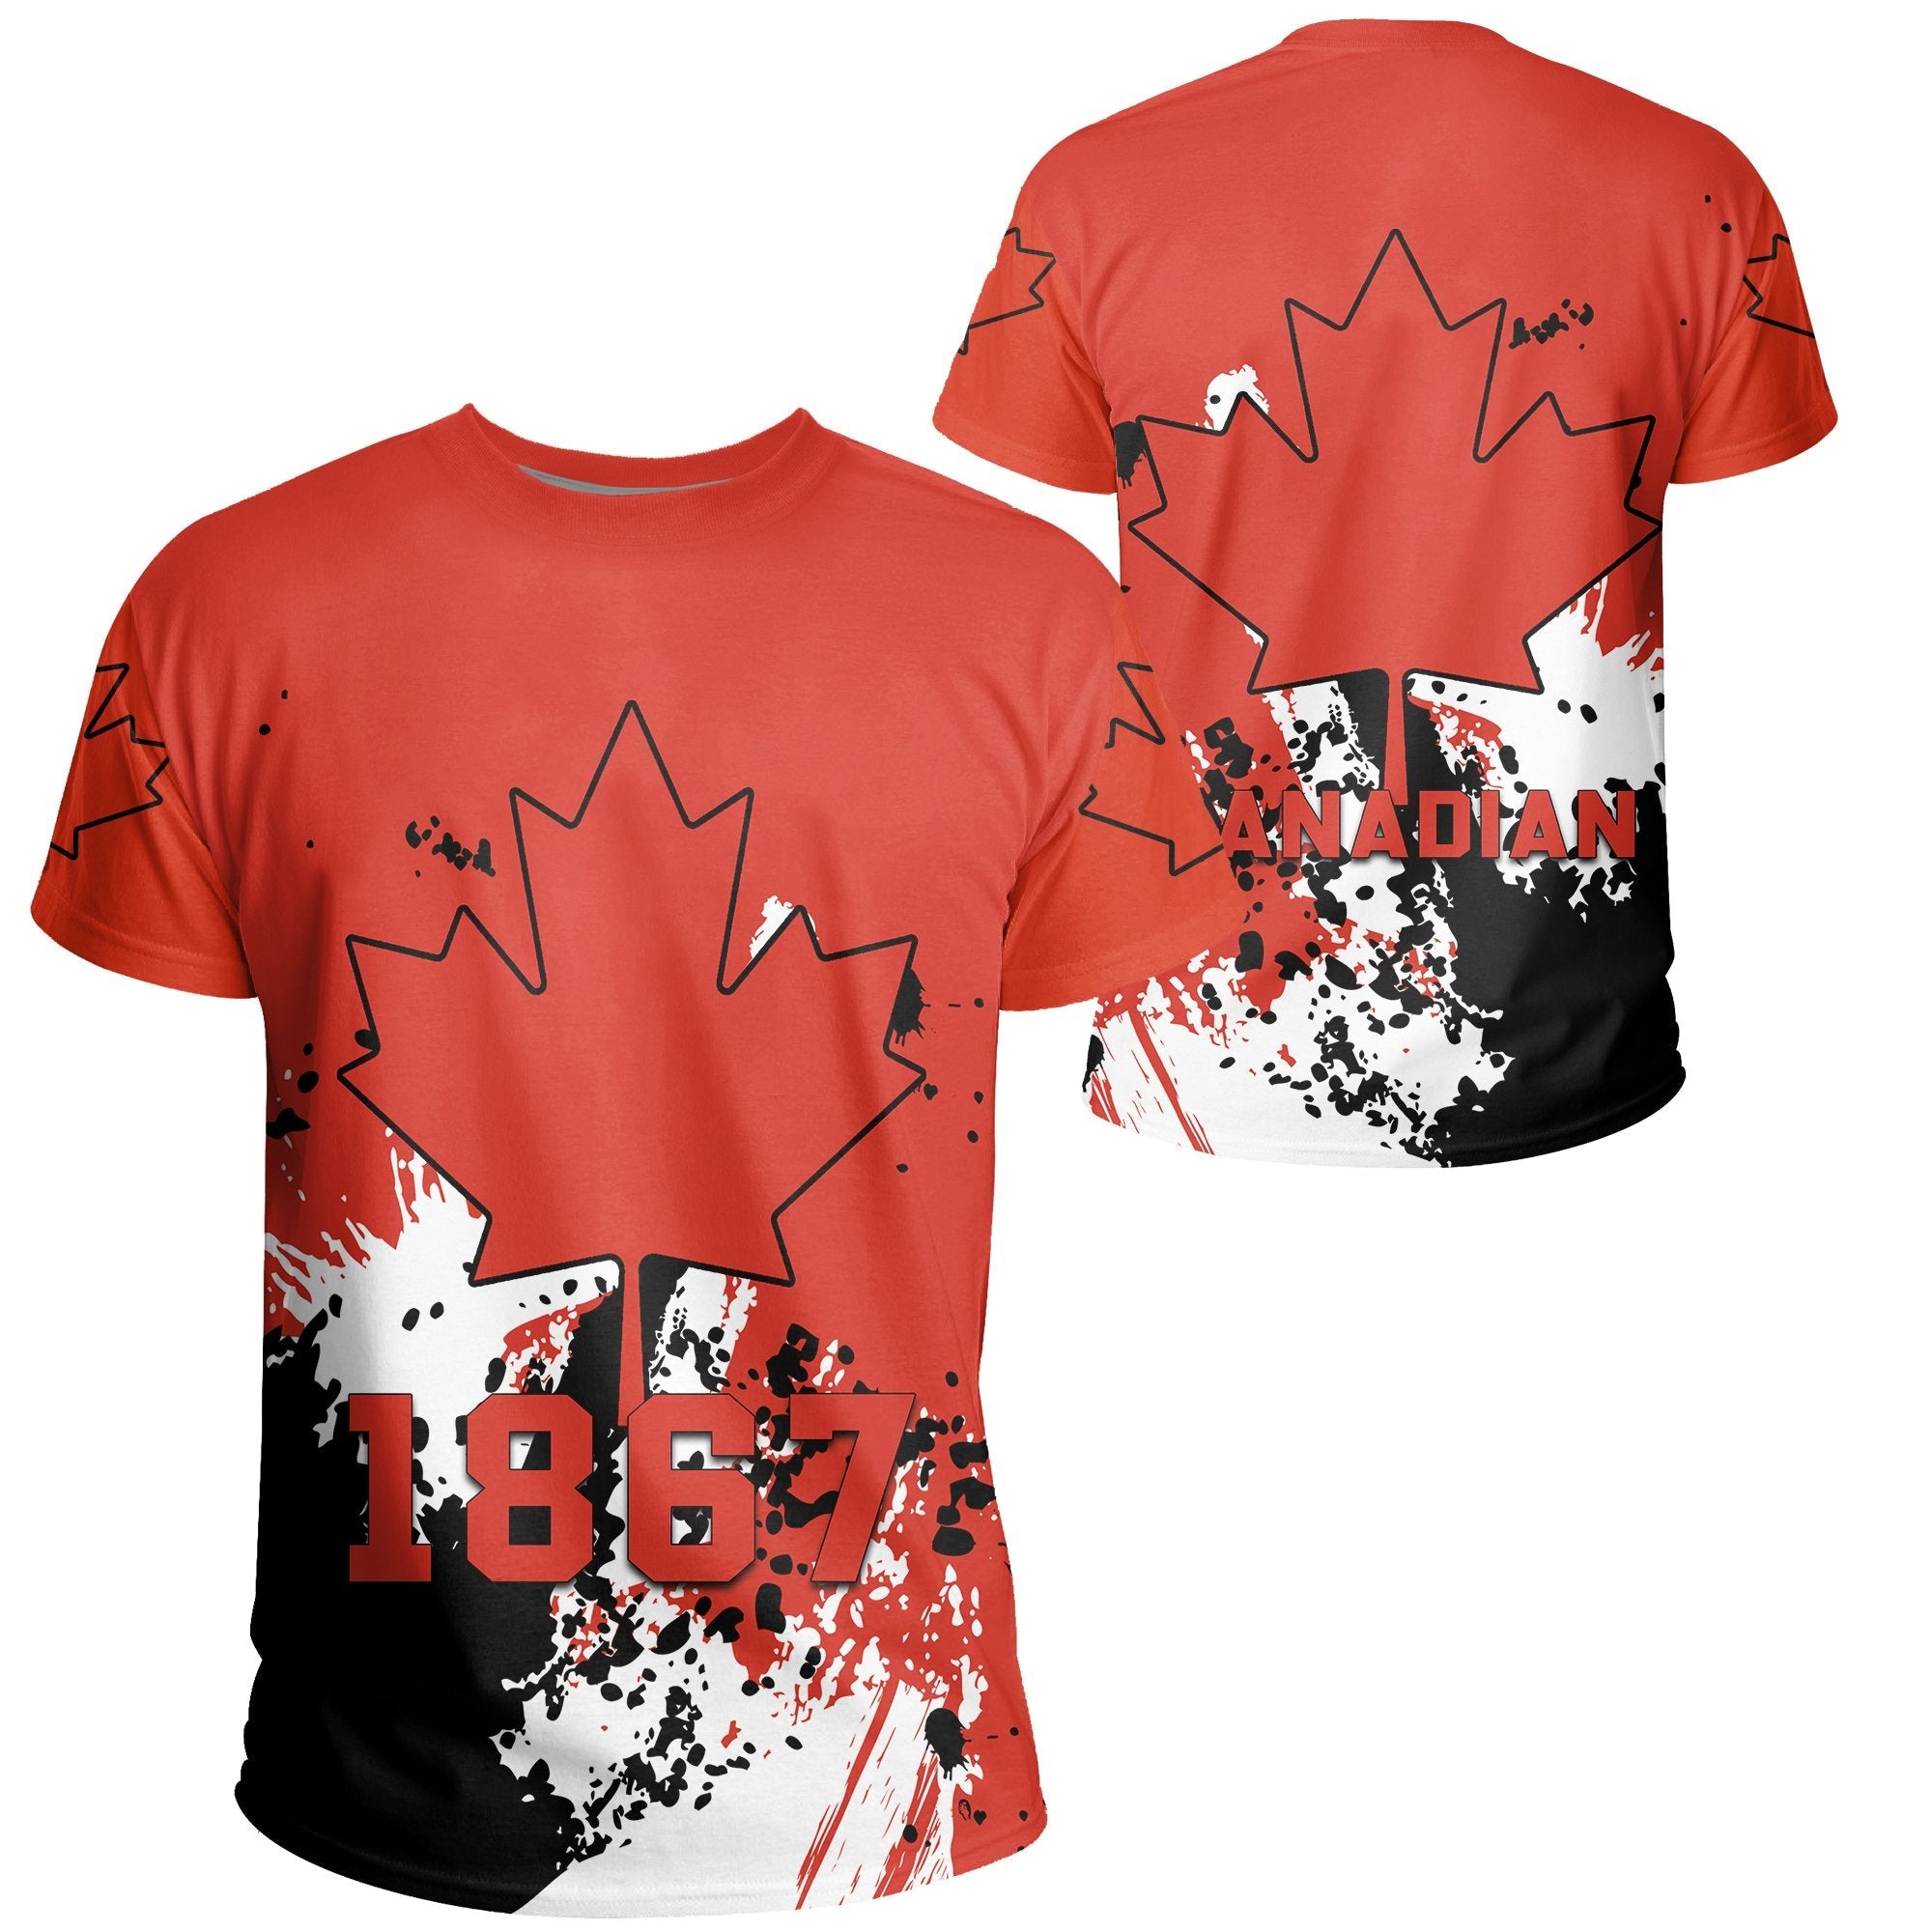 canada-coat-of-arms-t-shirt-spaint-style